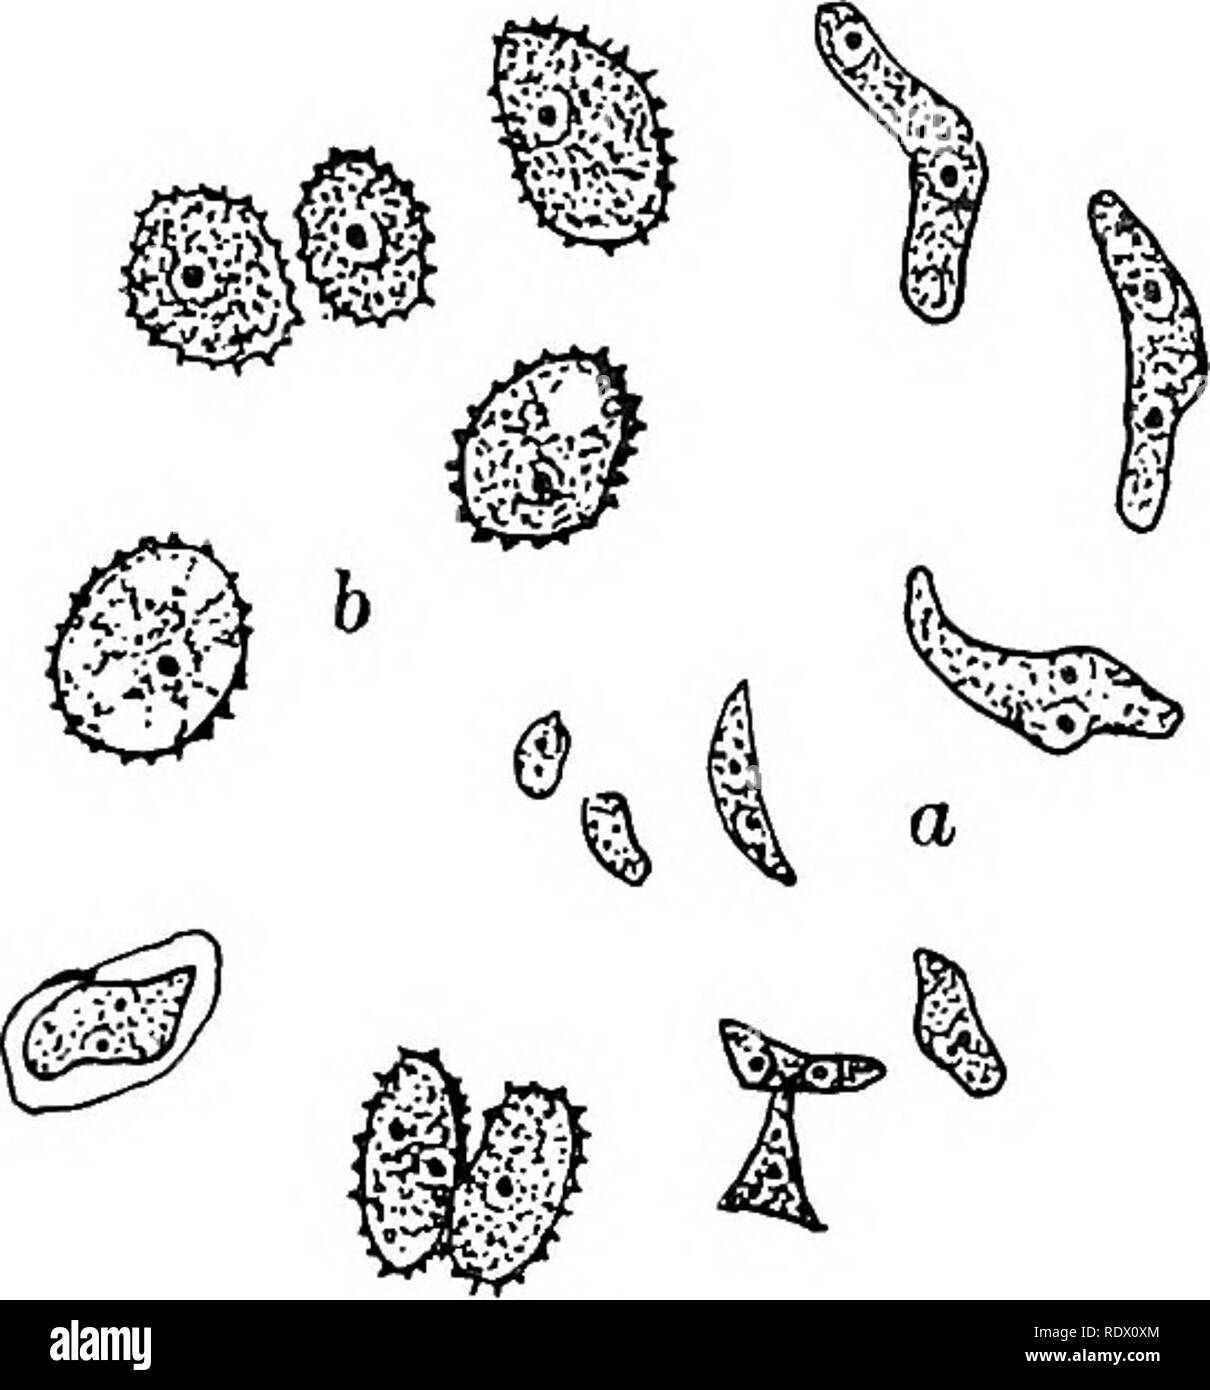 . Fungi, ascomycetes, ustilaginales, uredinales. Fungi. Fig. 151. Urocystis Fischeri; spore- ball, one spore germinating, x 500; after Plowright. Fig. 152. Ustilago Carbo u, young, binucleate brand-spores; l&gt;. older spores after nuclear fusion; after Rawitscher. The young spore, like the cells of the mycelium from which it is derived, contains two nuclei (fig. 1^20). These undergo fusion, so that the mature spore is uninucleate (fig. 152(5). The pairing of the nuclei, which begins with the association of the basidiospores (or their conidia), is thus completed in the brand-spore. The minute Stock Photo